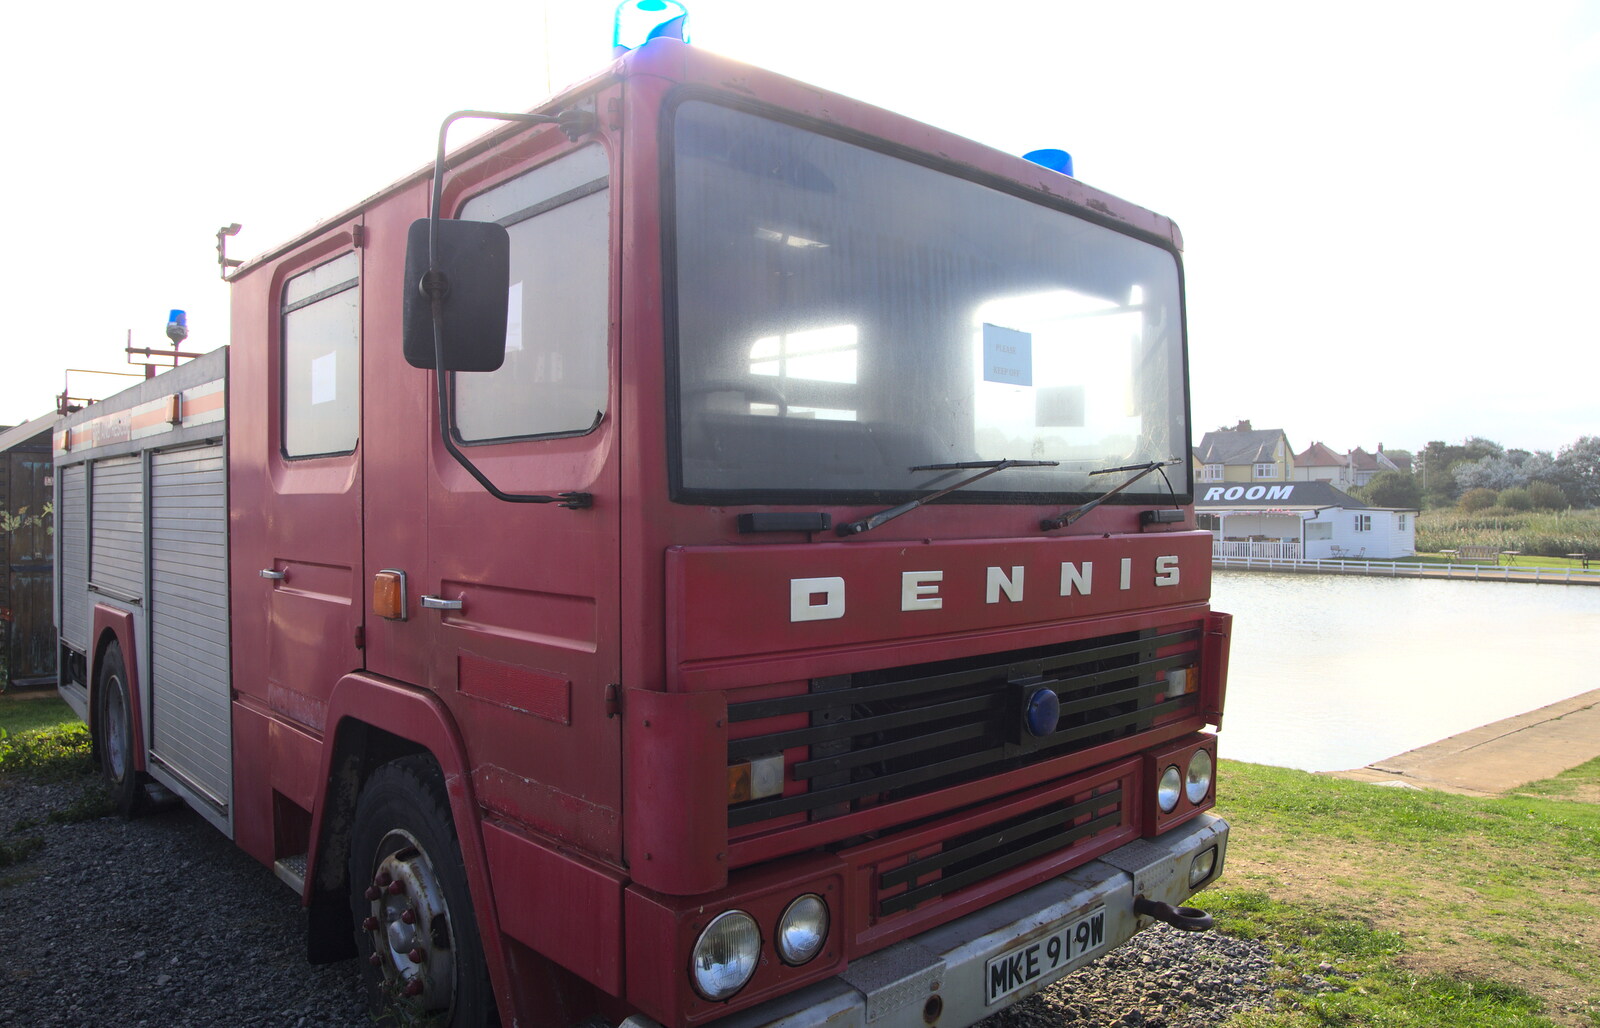 A derelict fire engine from Southwold By The Sea, Suffolk - 29th September 2013